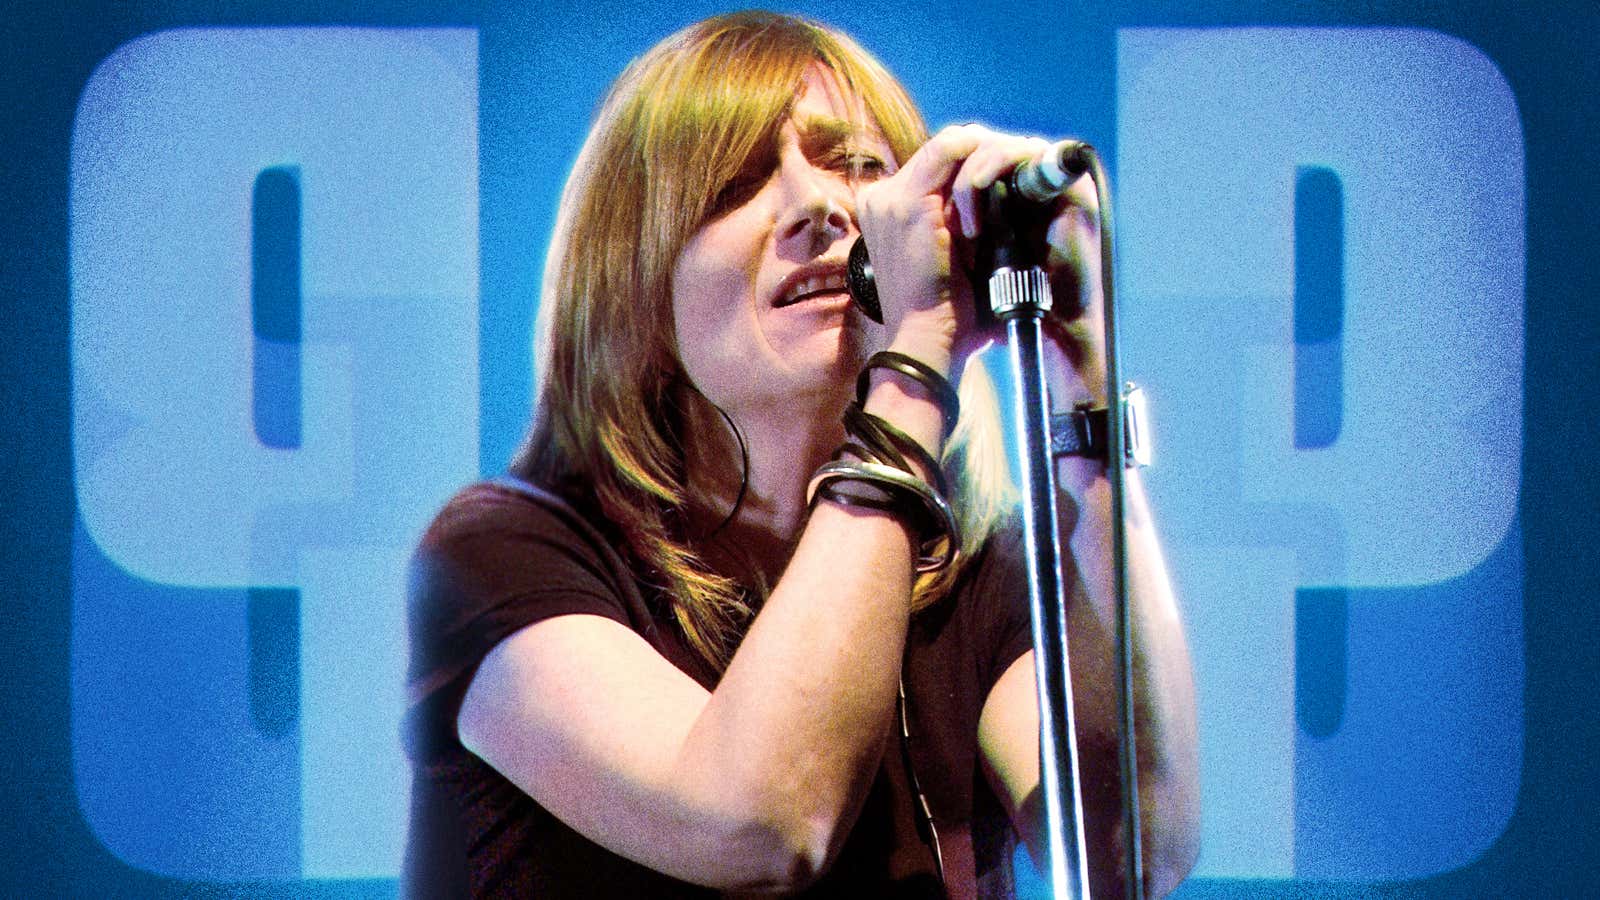 Beth Gibbons of Portishead (Photo: Jim Dyson/Getty Images)